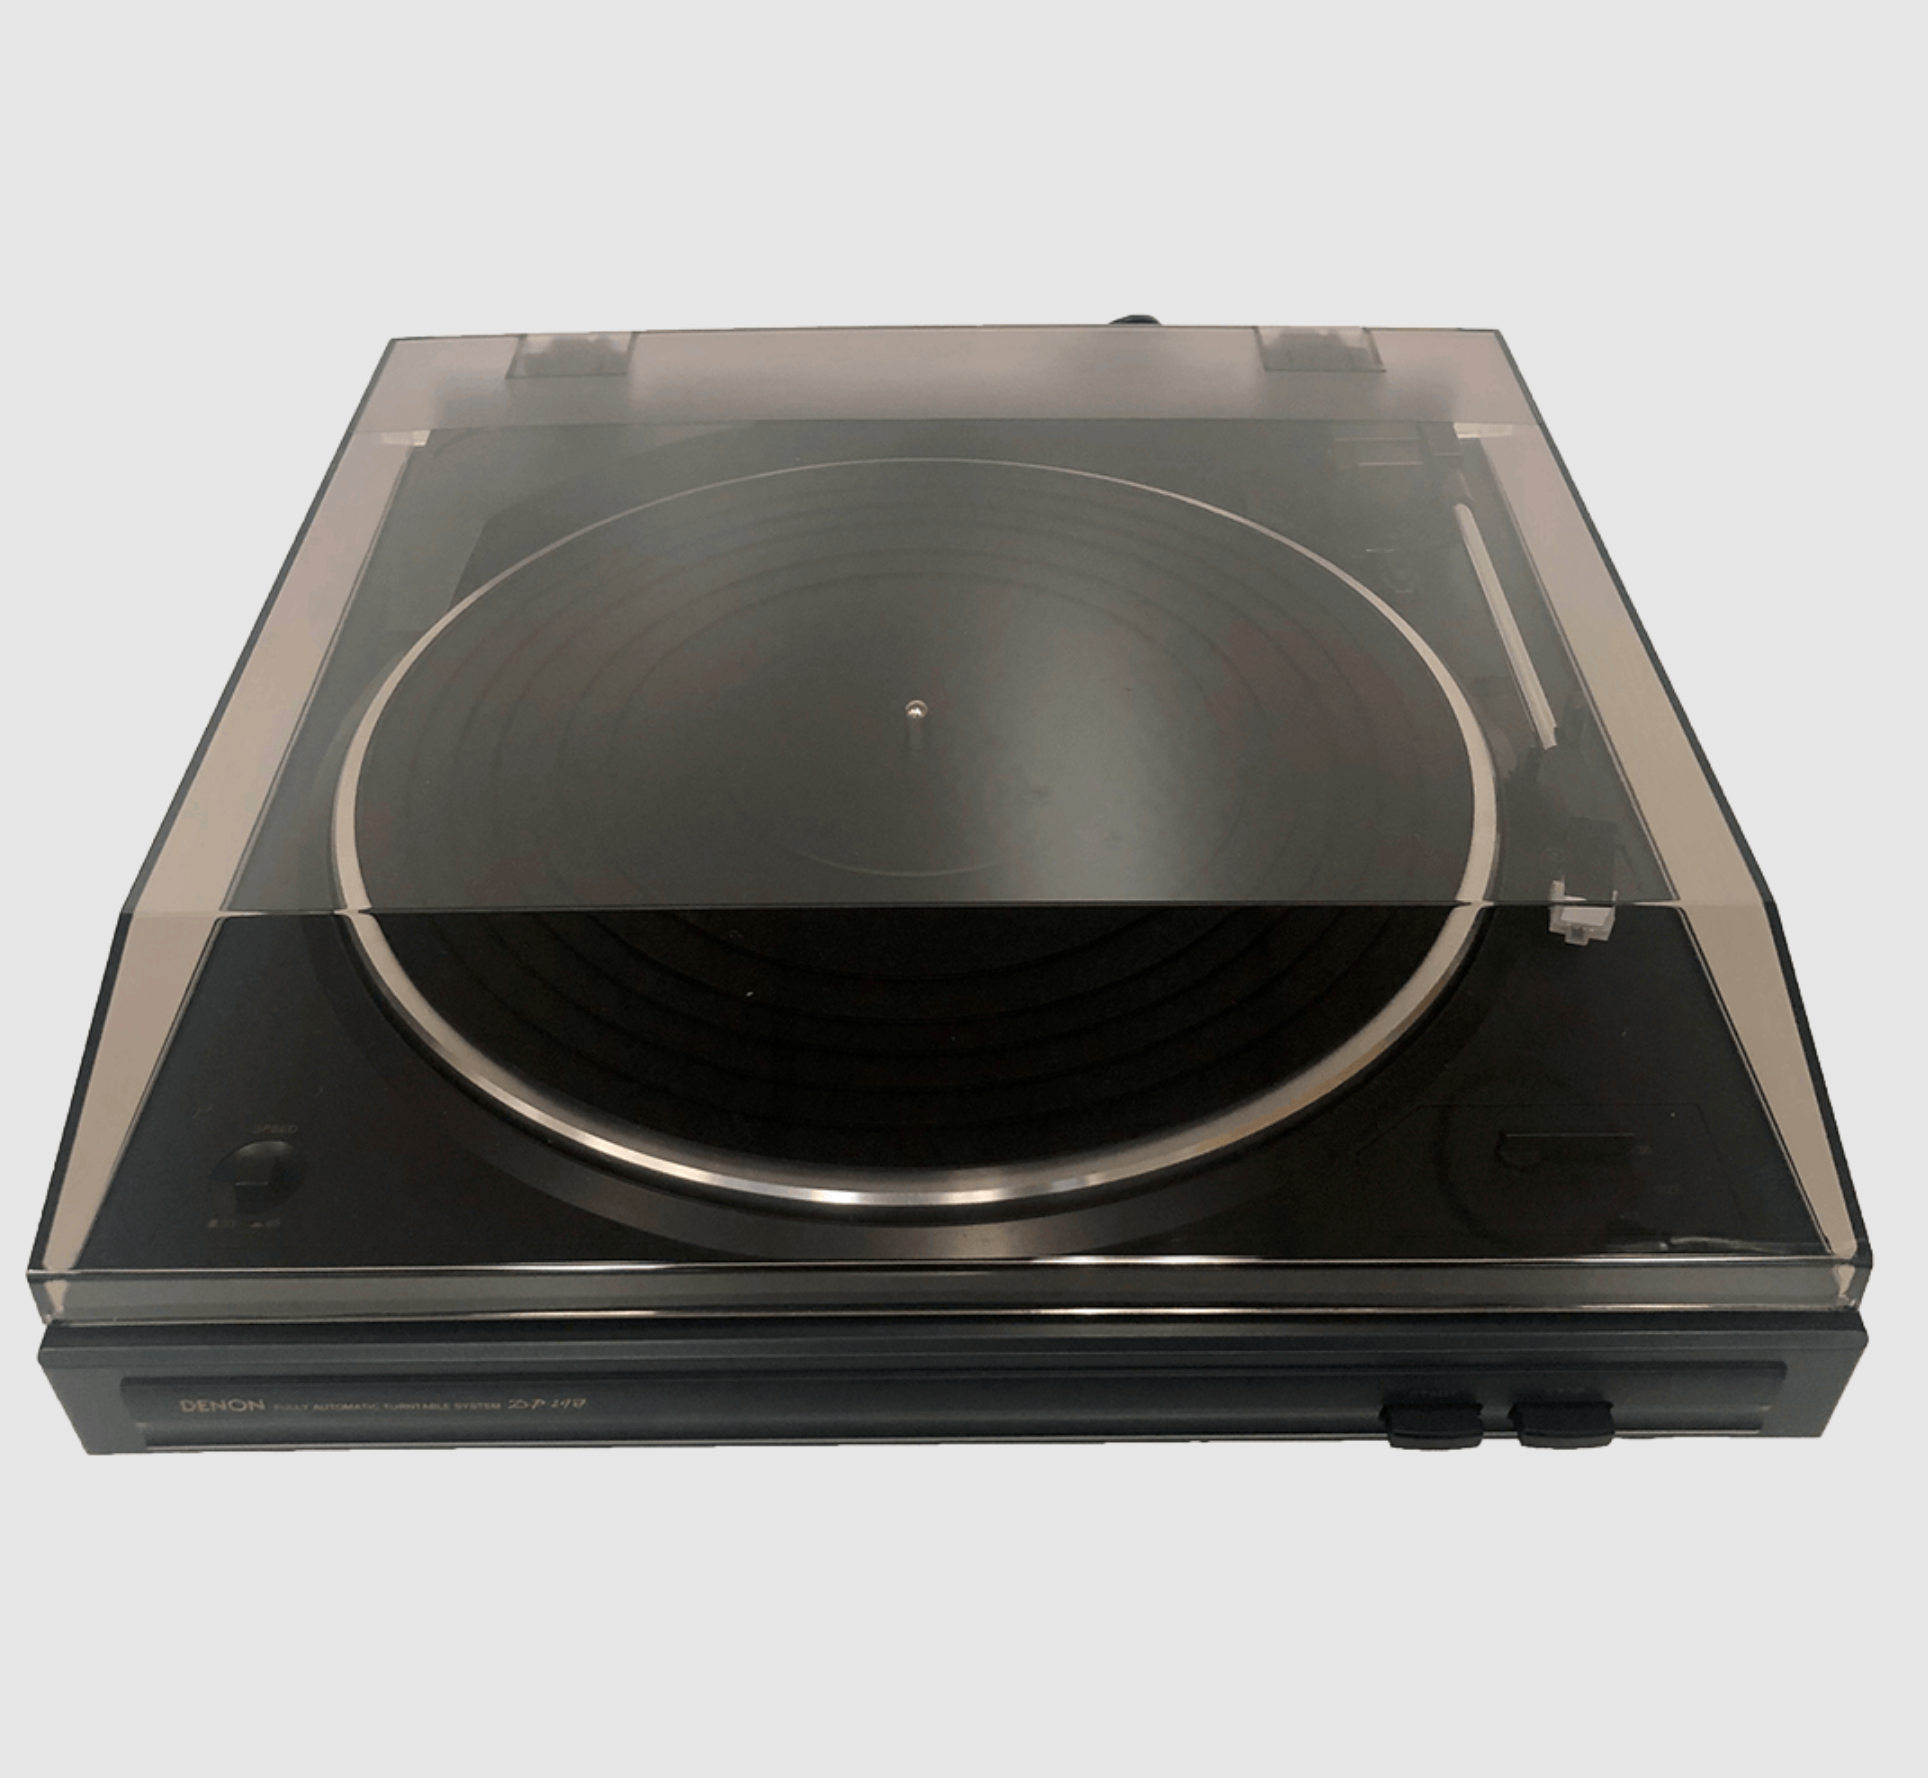 Denon DP-29 FA/FE Fully Automatic Turntable, with dustcover on